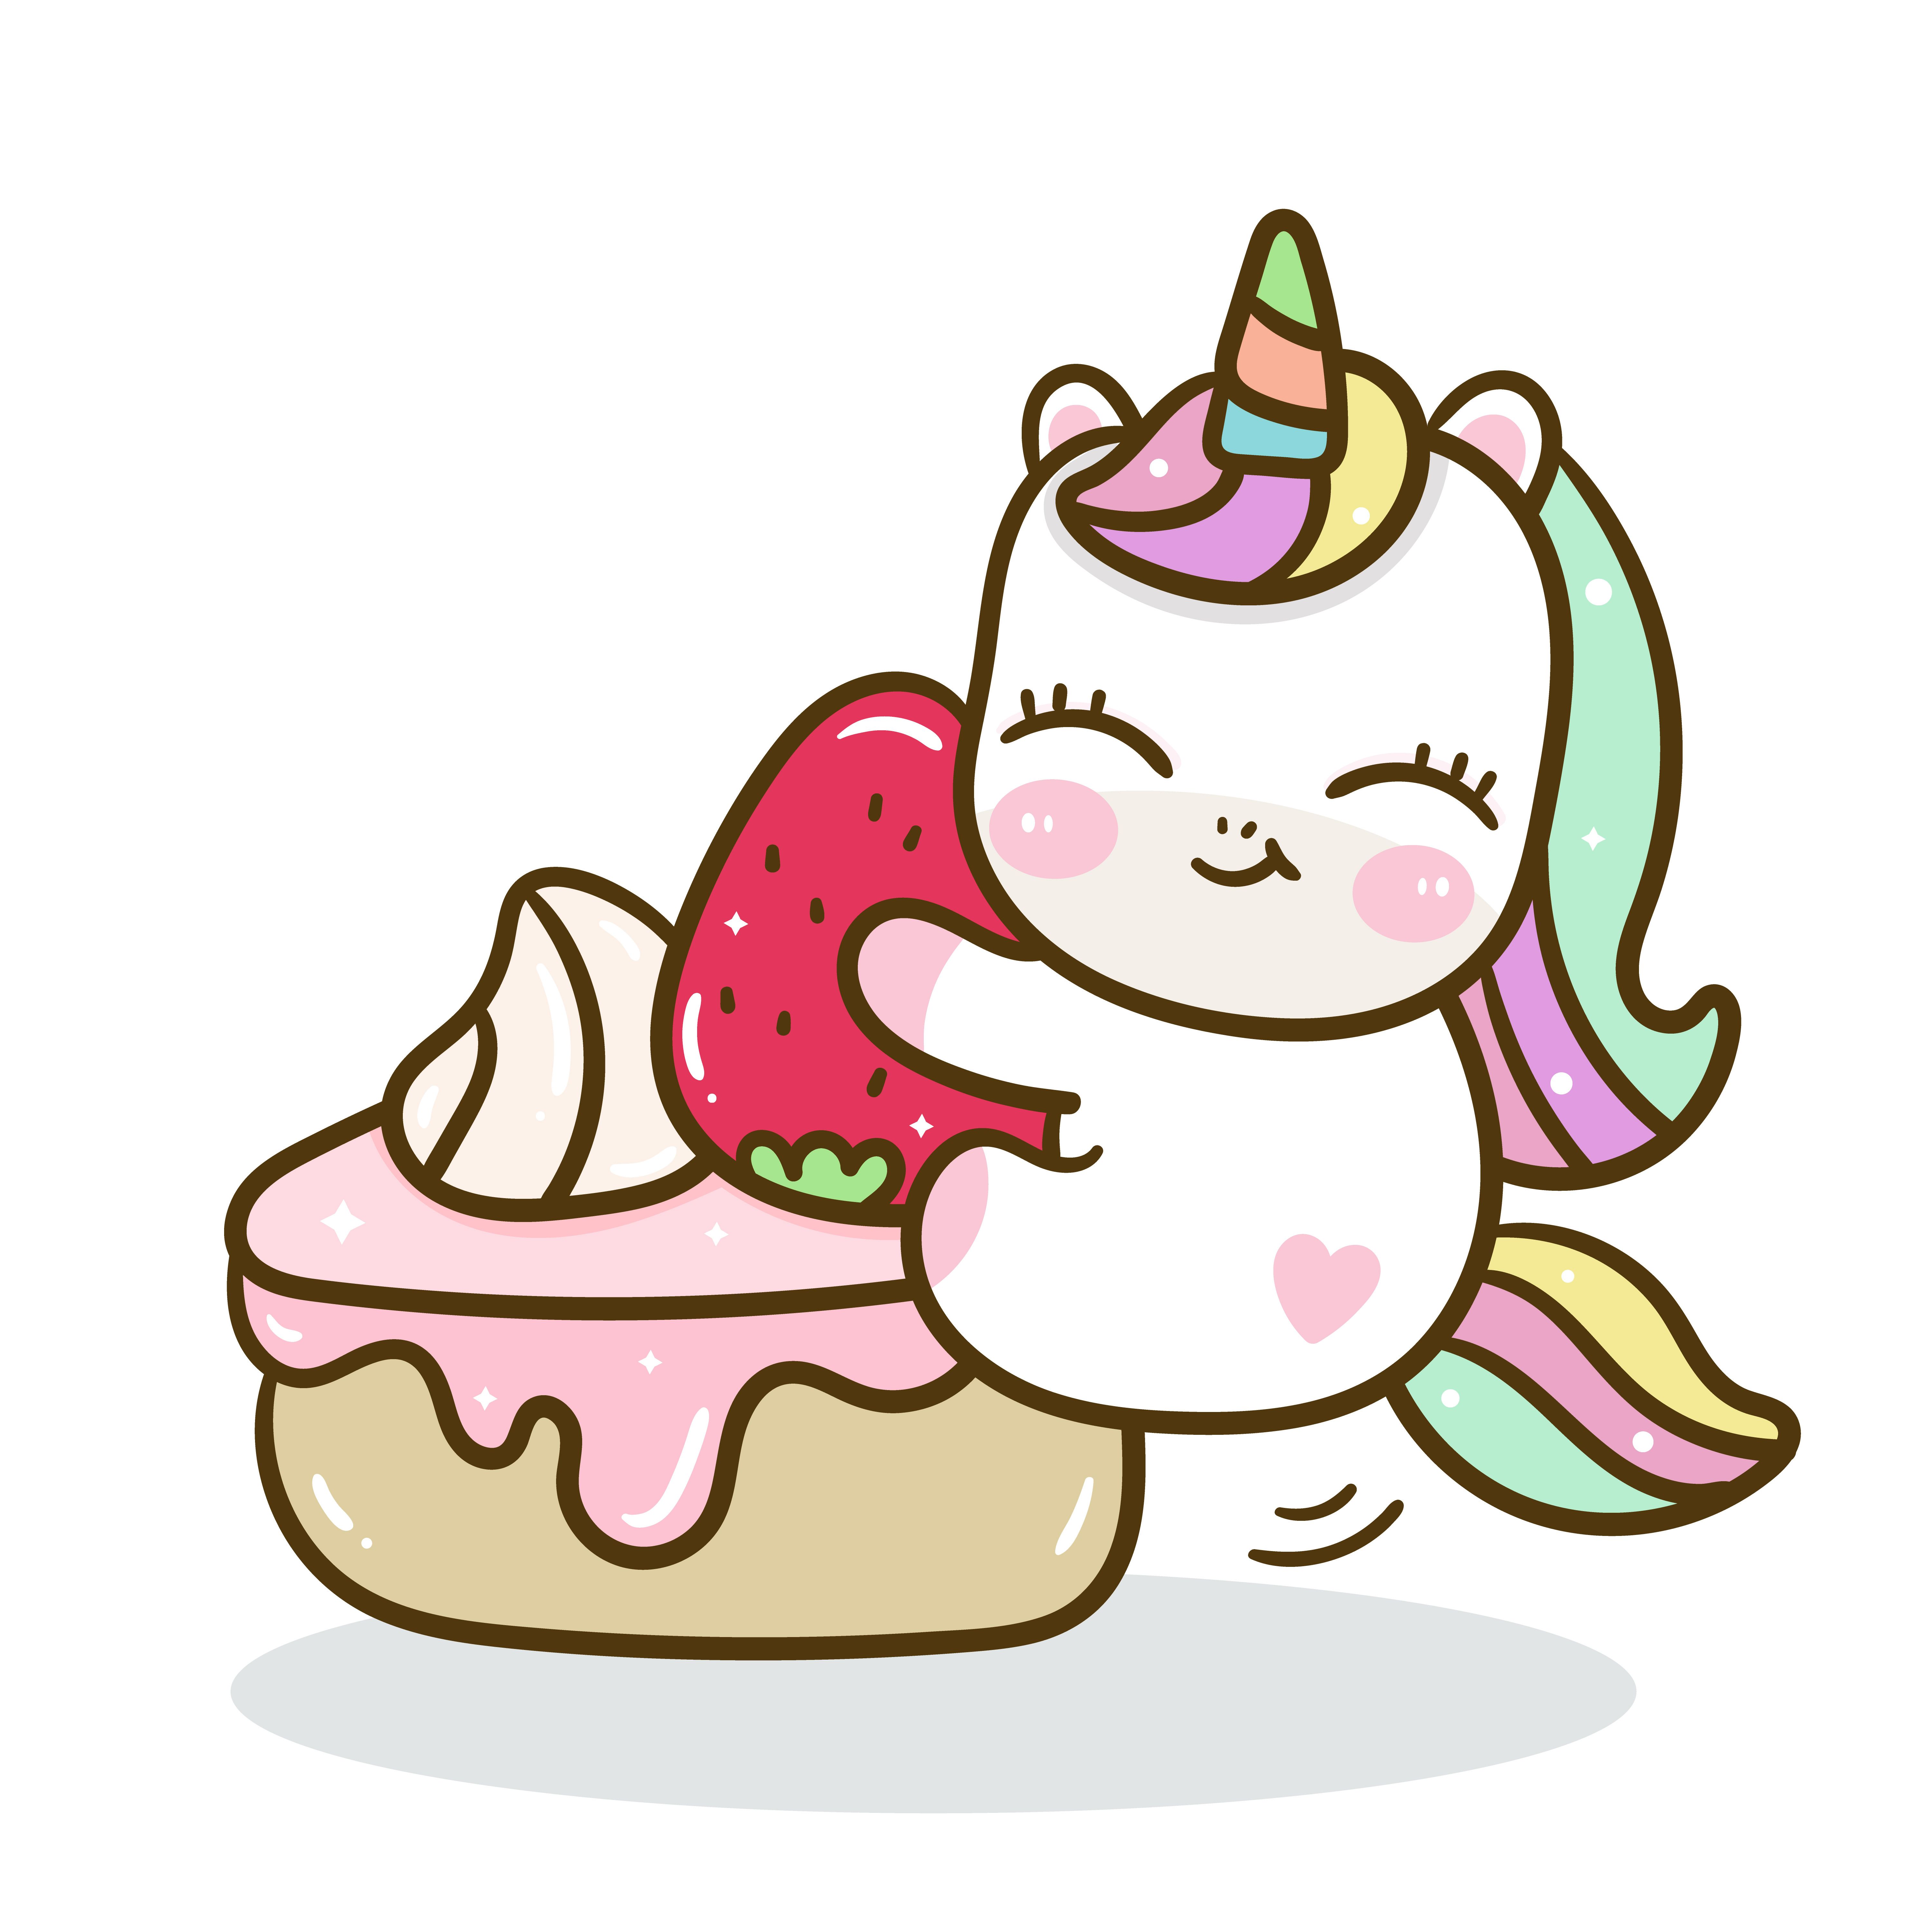 Cute Unicorn vector with sweet cake background Free